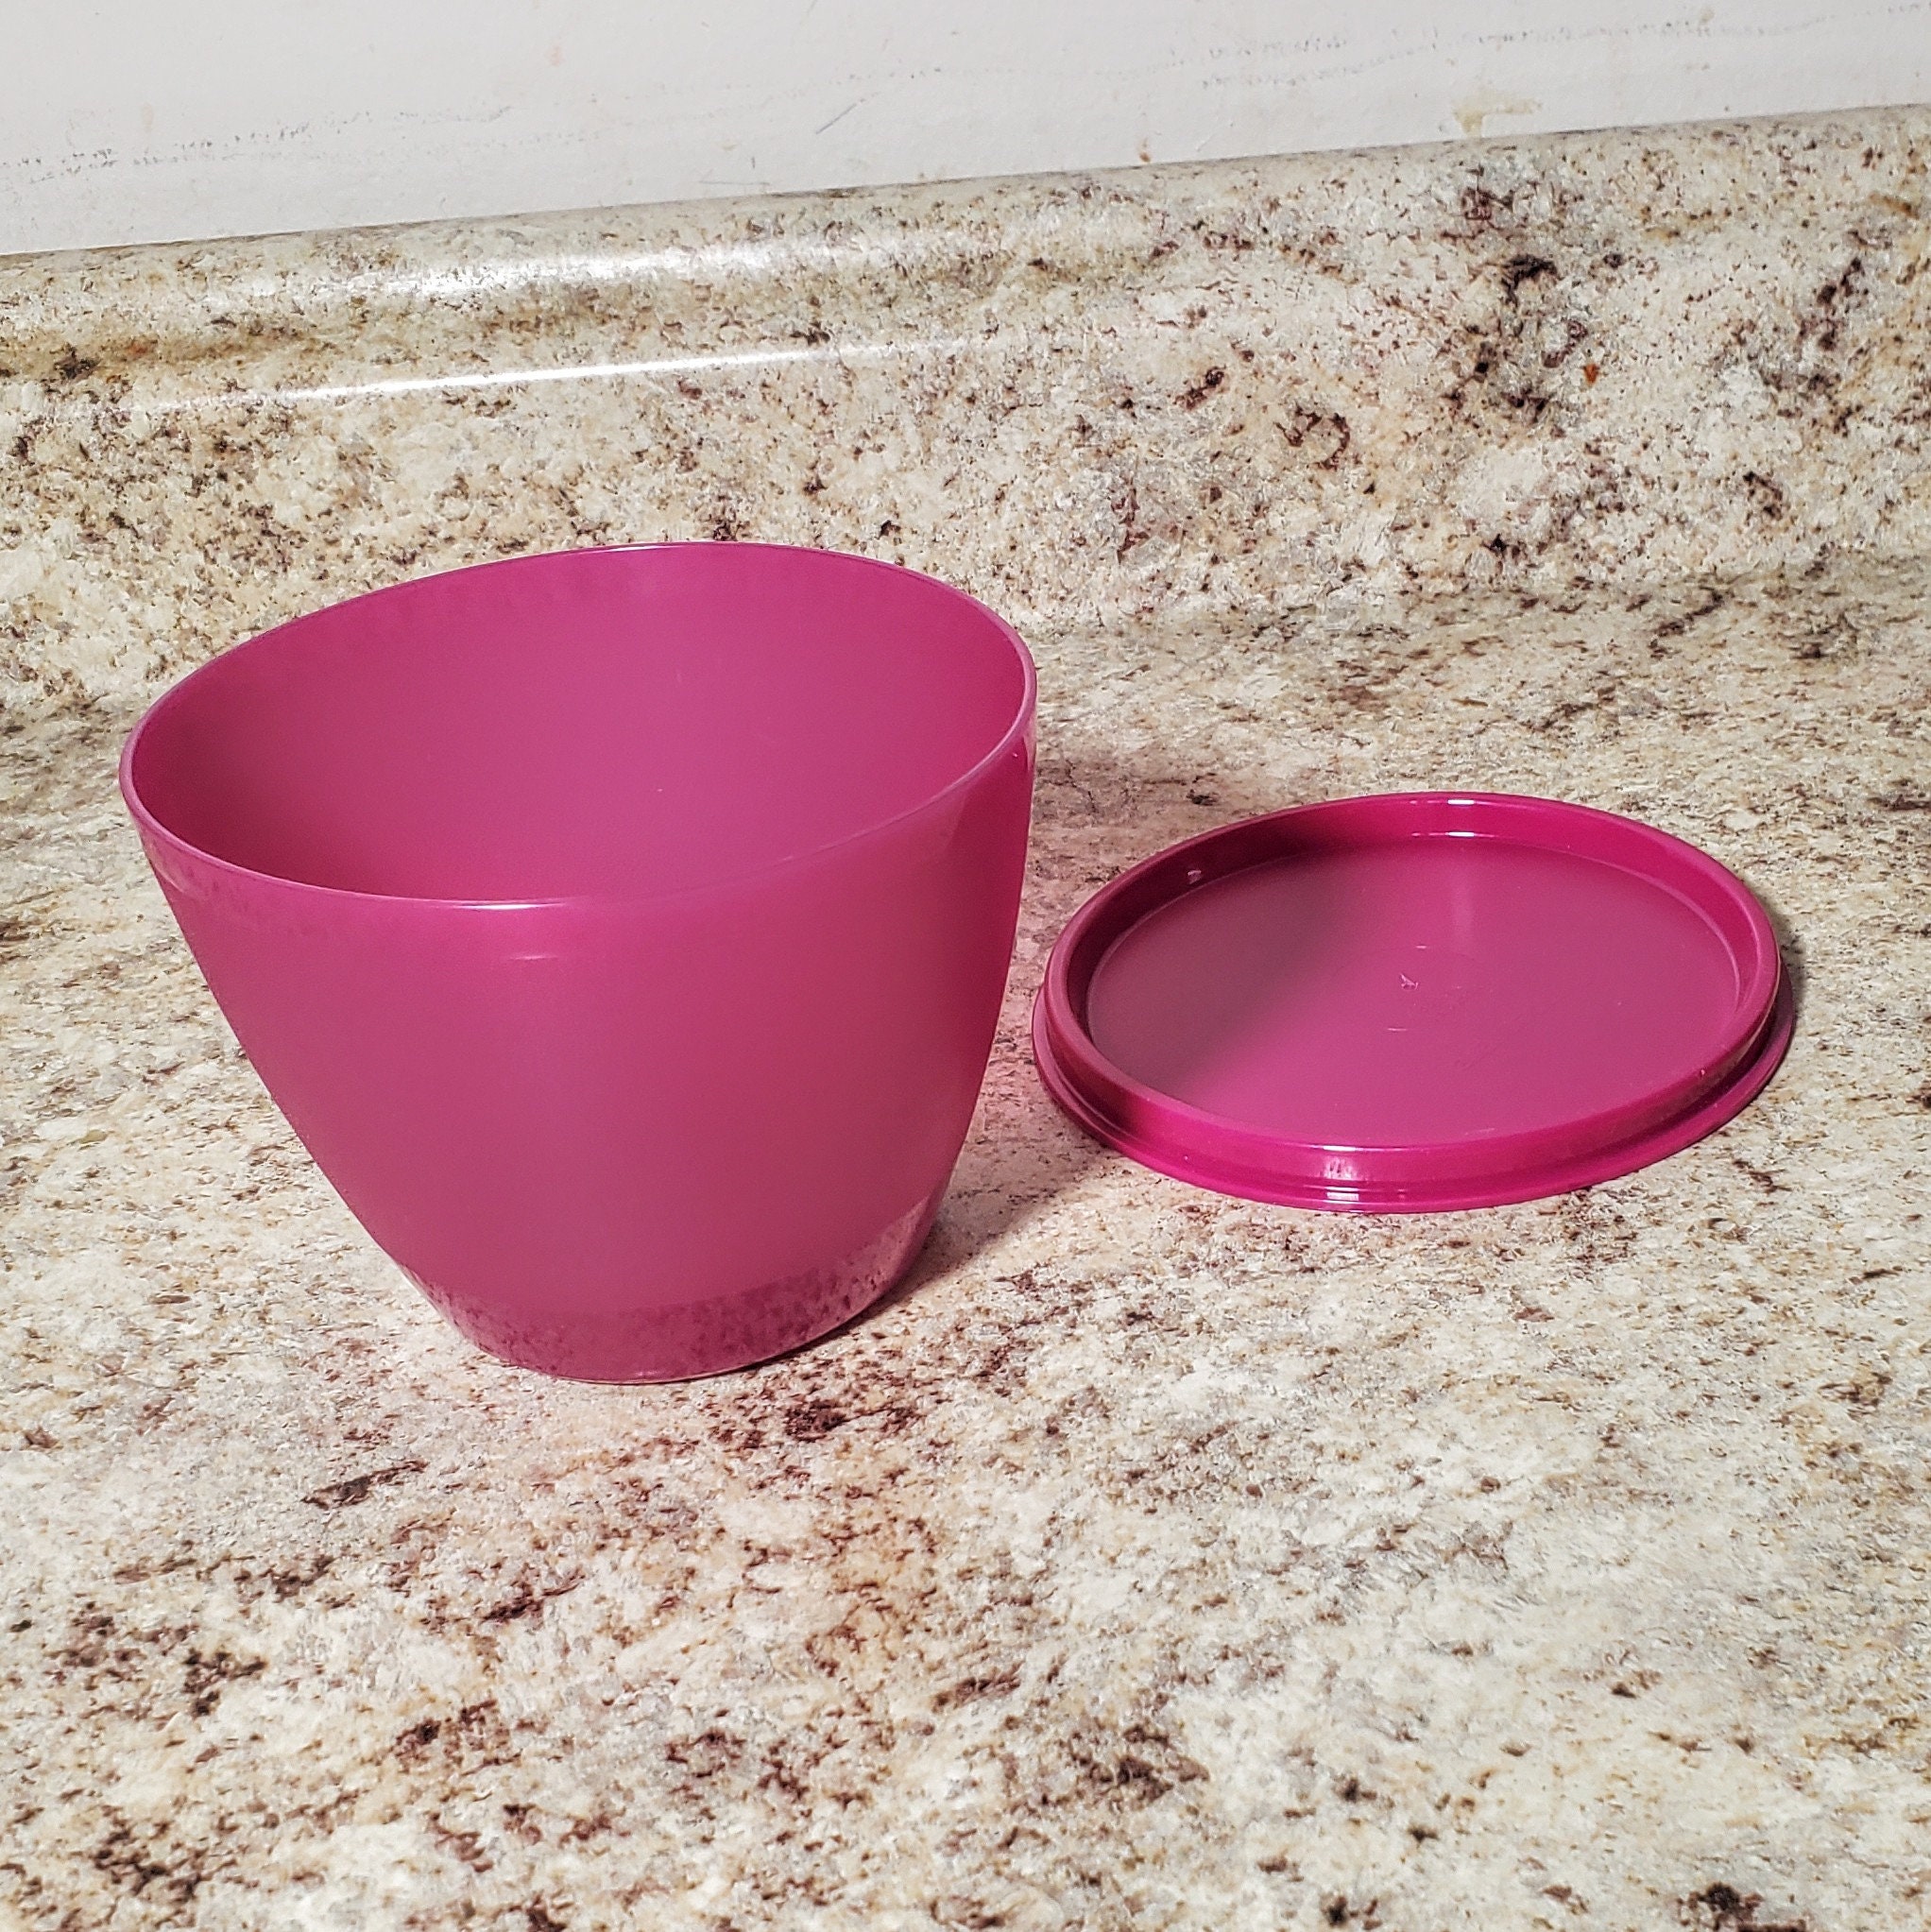 Buy New Tupperware Refrigerator Bowl 14oz Raspberry Pink & Matching Seal  New 148D Online in India 